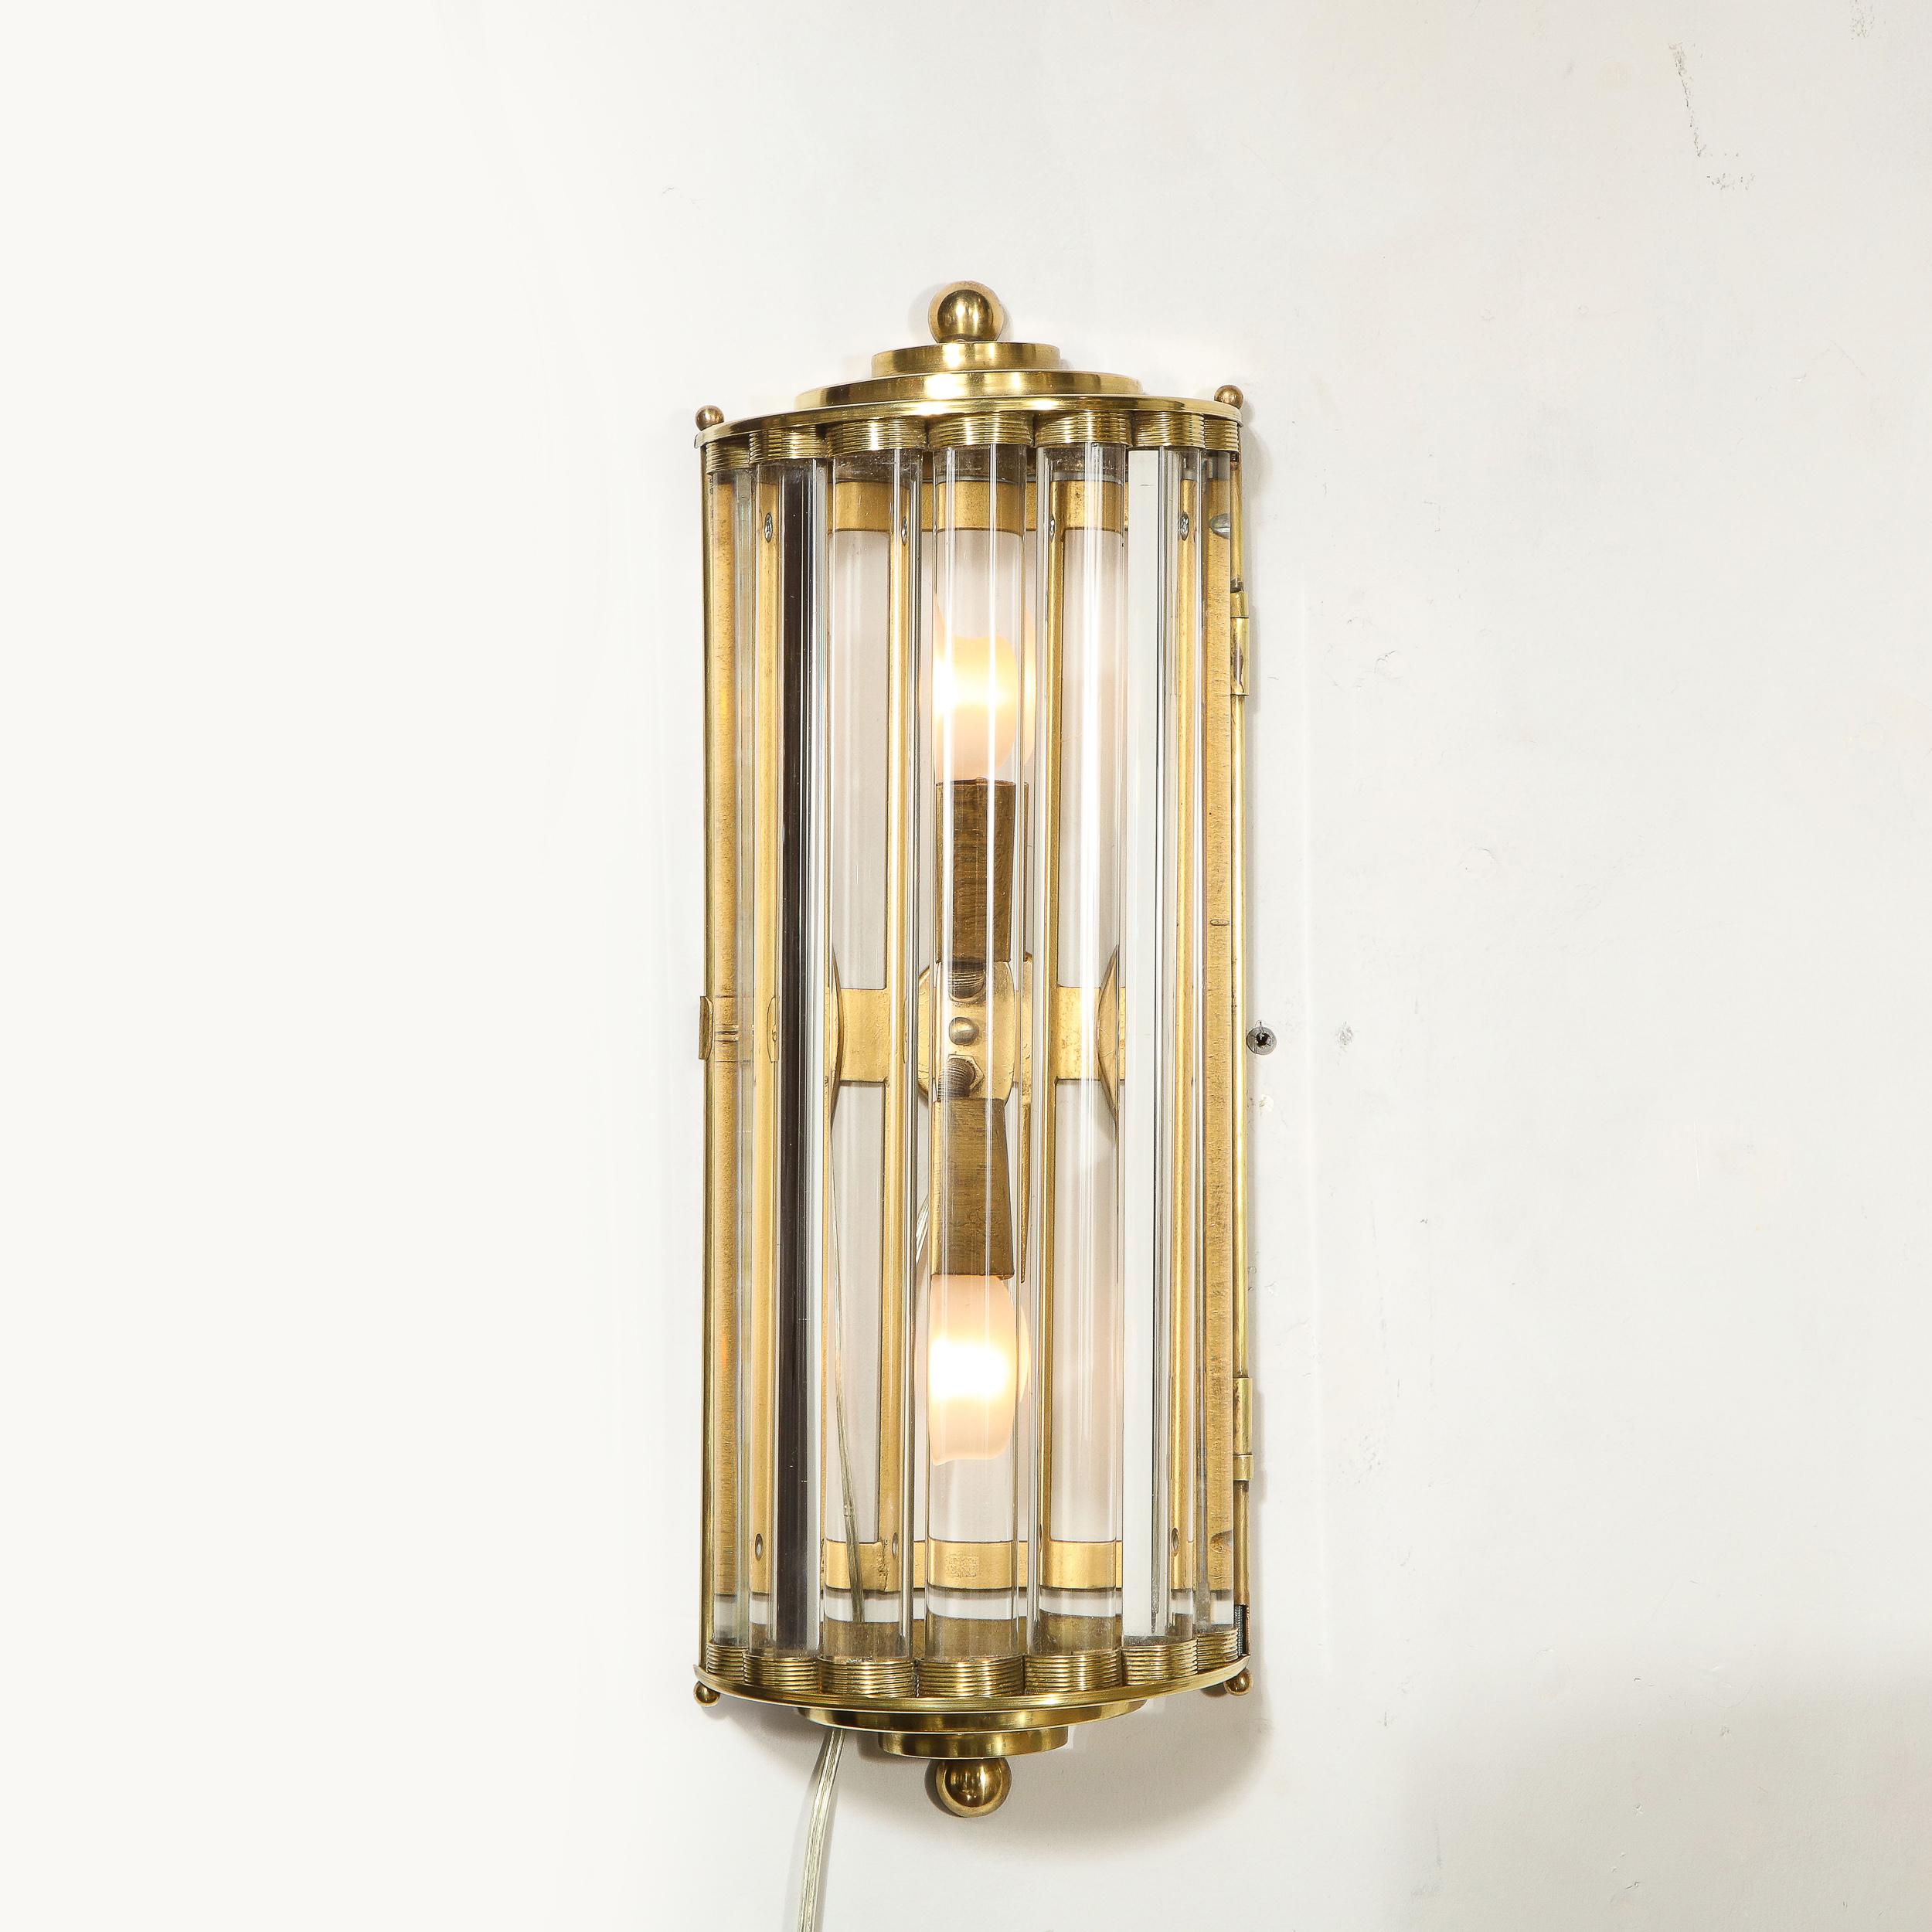 This of Art Deco Handblown Murano Glass Rod and Brass Sconces were produced and signed by the fabled atelier of Venini in Italy, circa 1930. Each sconce offers seven translucent glass rods that are secured by channeled and streamlined brass